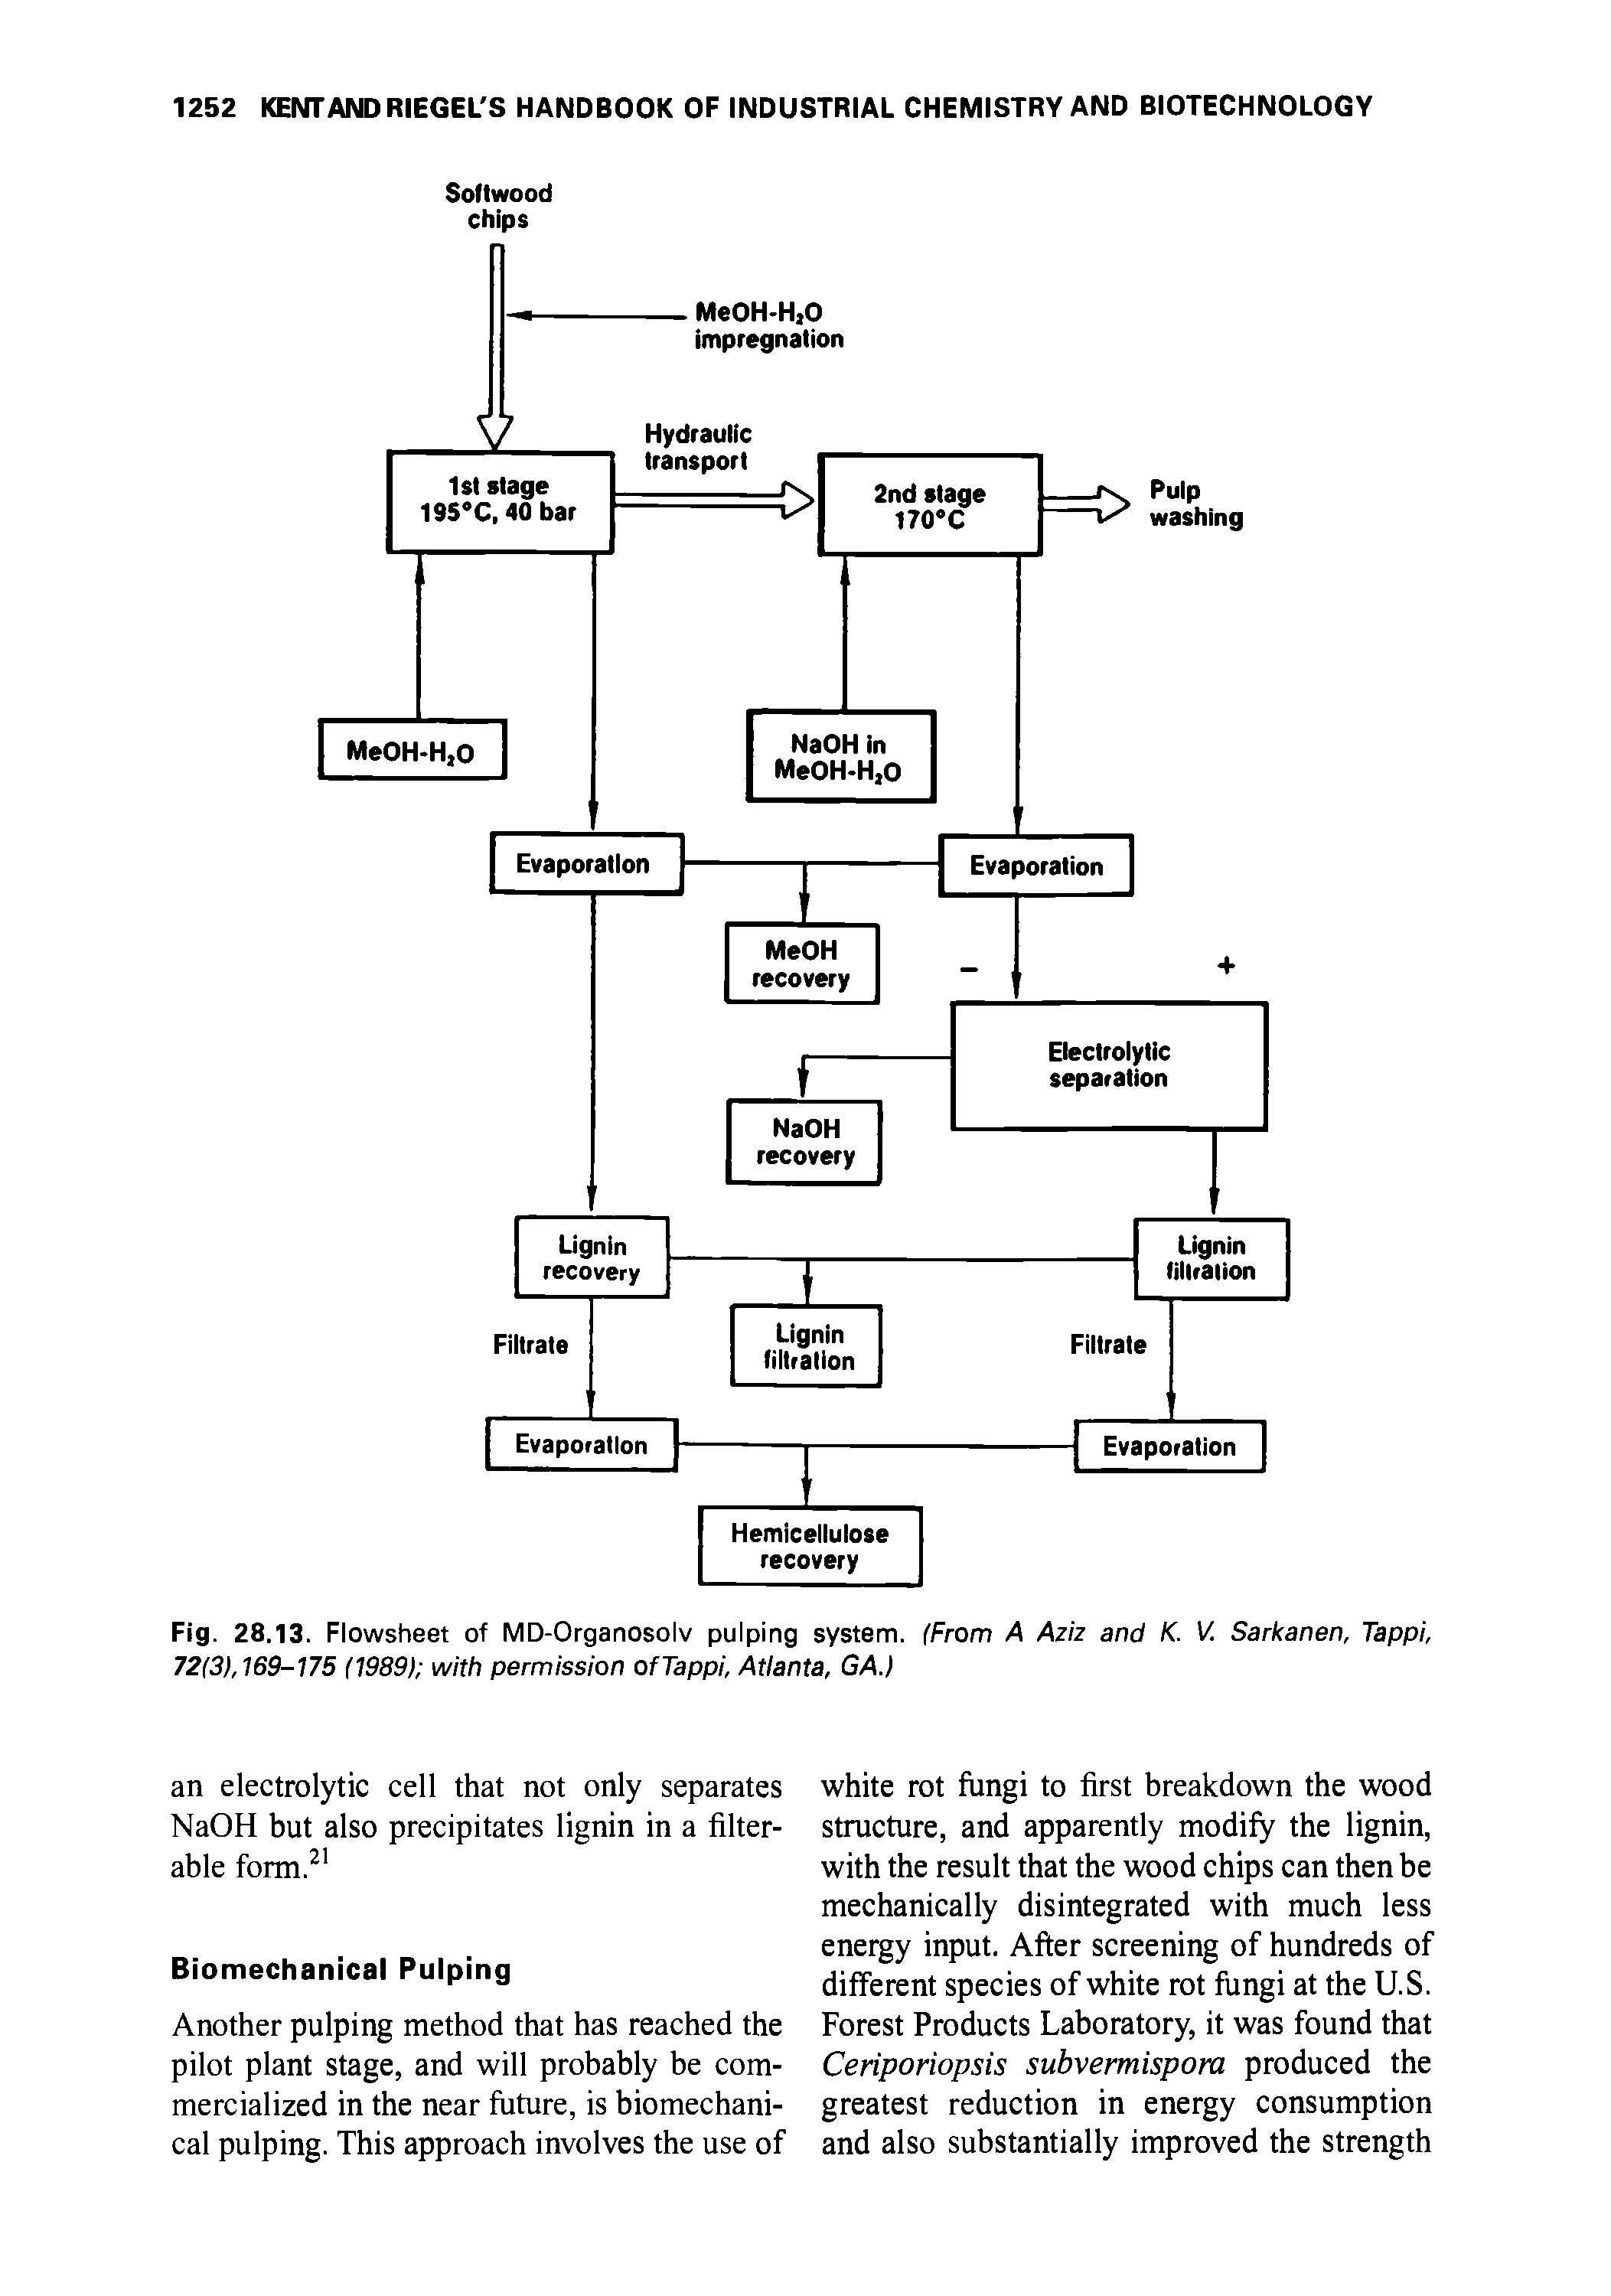 Fig. 28.13. Flowsheet of MD-Organosolv pulping system. (From A Aziz and K. V. Sarkanen, Tappi, 72(31,169-175 (1989) with permission of Tappi, Atlanta, GA.)...